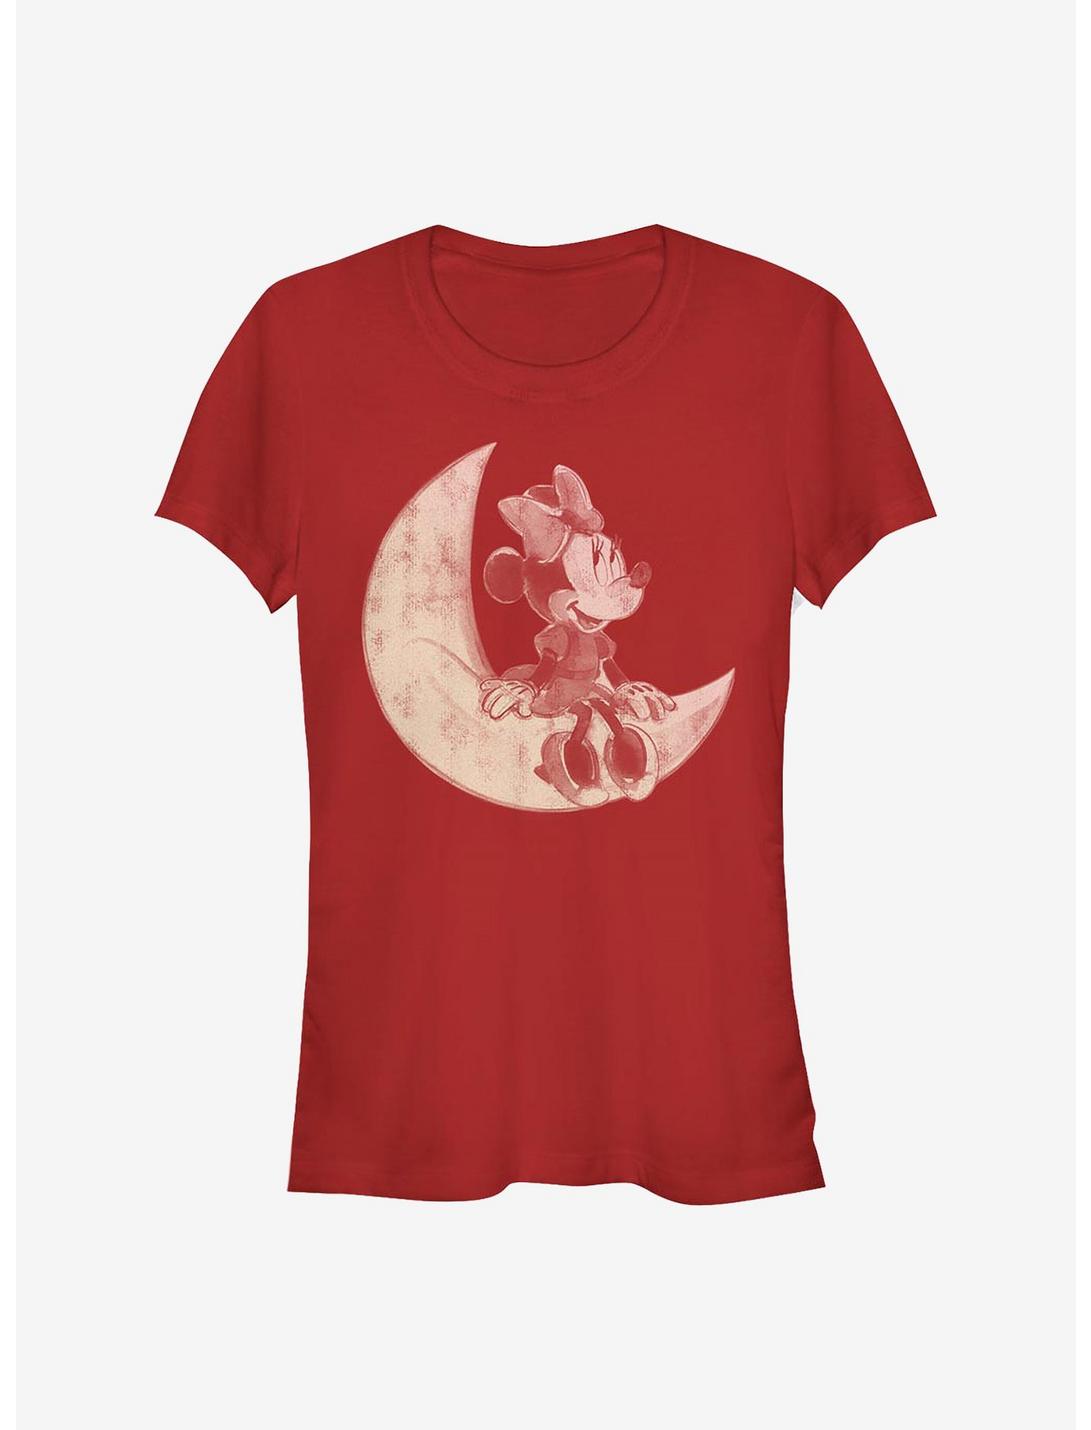 Disney Minnie Mouse Minnie On The Moon Girls T-Shirt, RED, hi-res